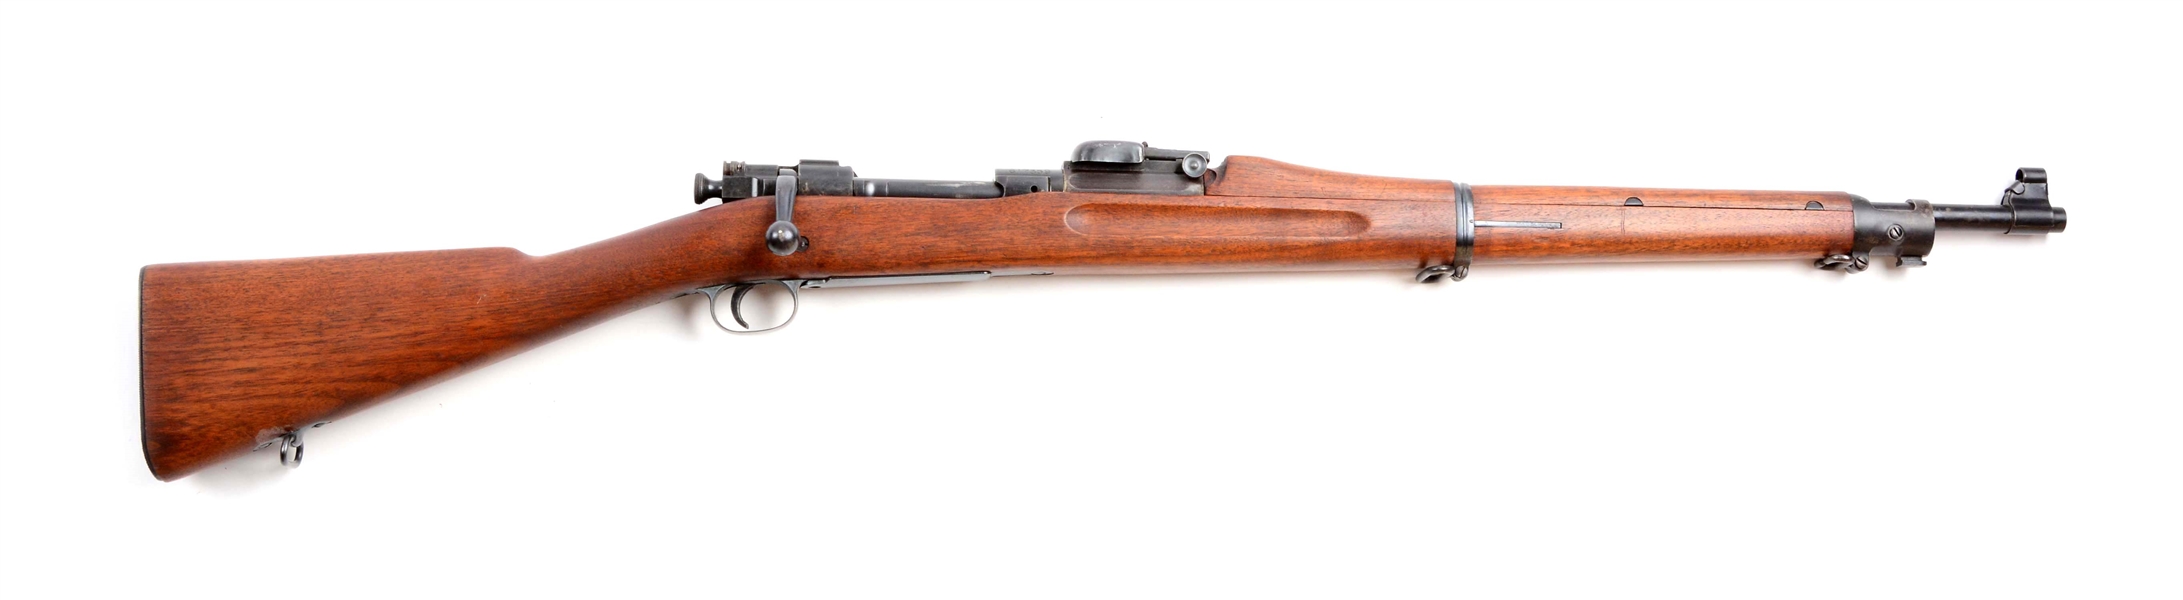 (C) HIGH CONDITION EARLY SPRINGFIELD MODEL 1903 US BOLT ACTION RIFLE (1915).